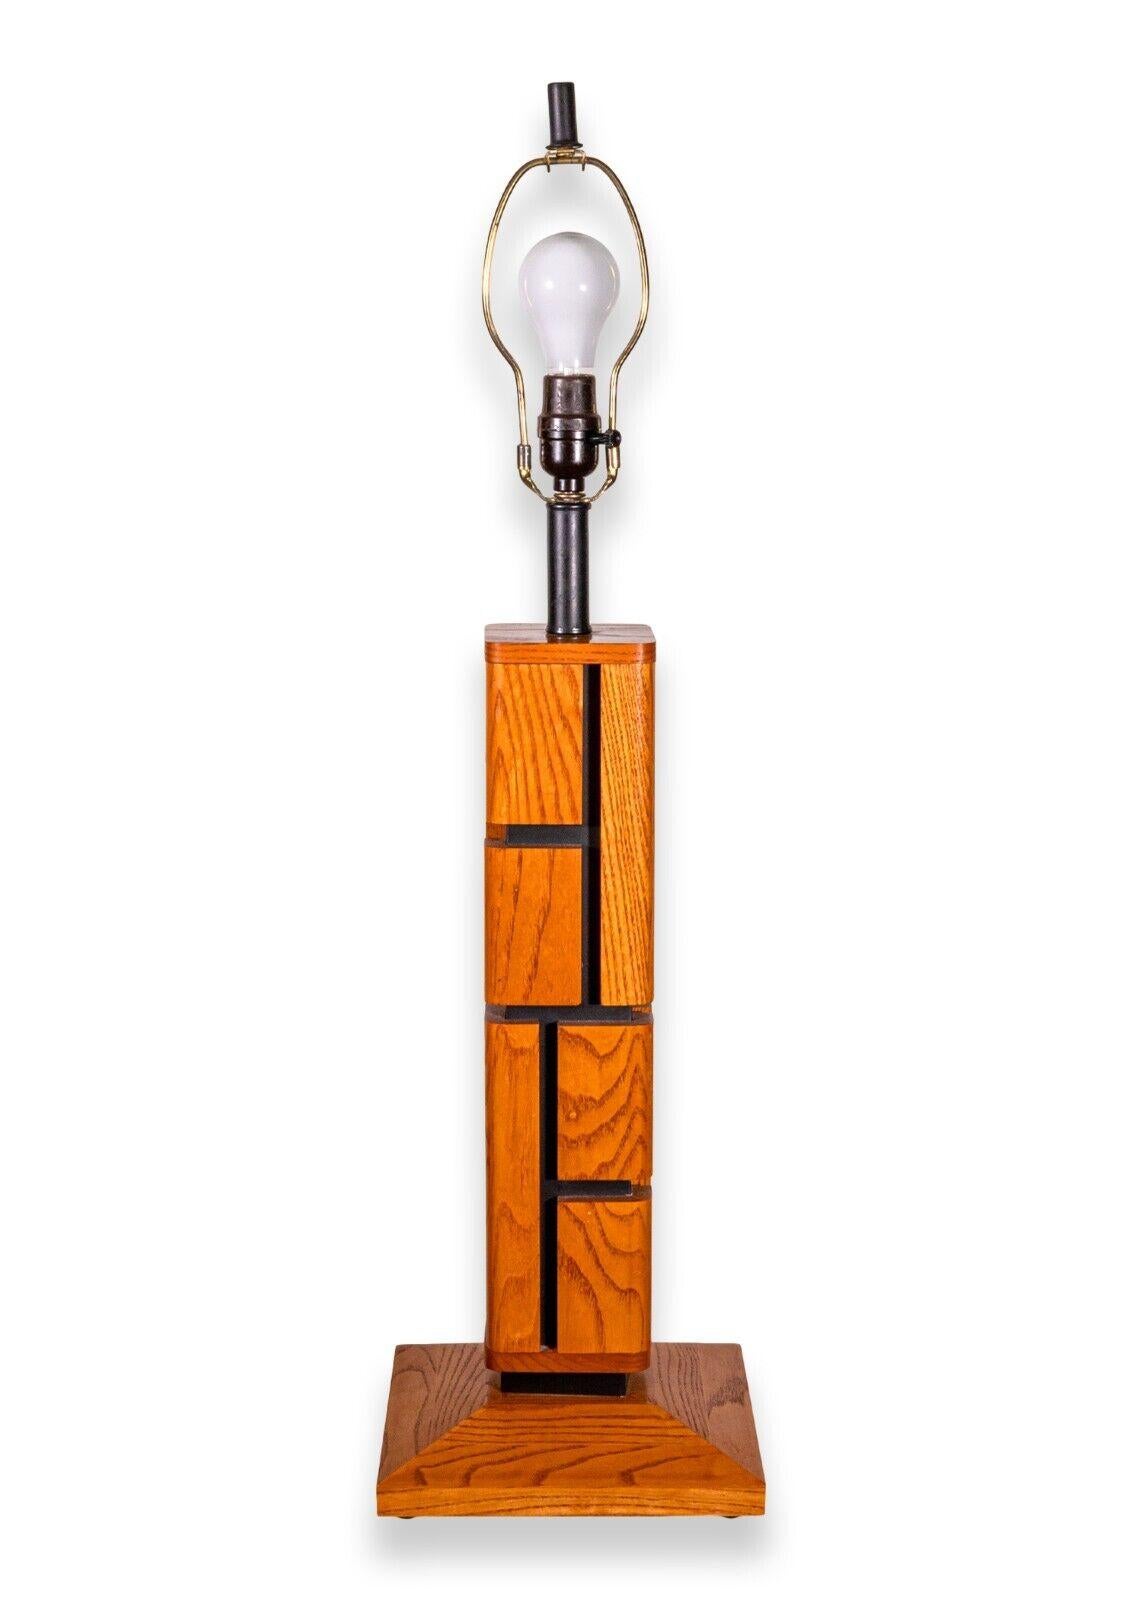 A pair of geometric wood puzzle table lamps. A lovely pair of table lamps featuring a unique geometric design with a natural wood grain on the outside, and a black finish on the inside. These lamps have a square wood base with small rubber feet on